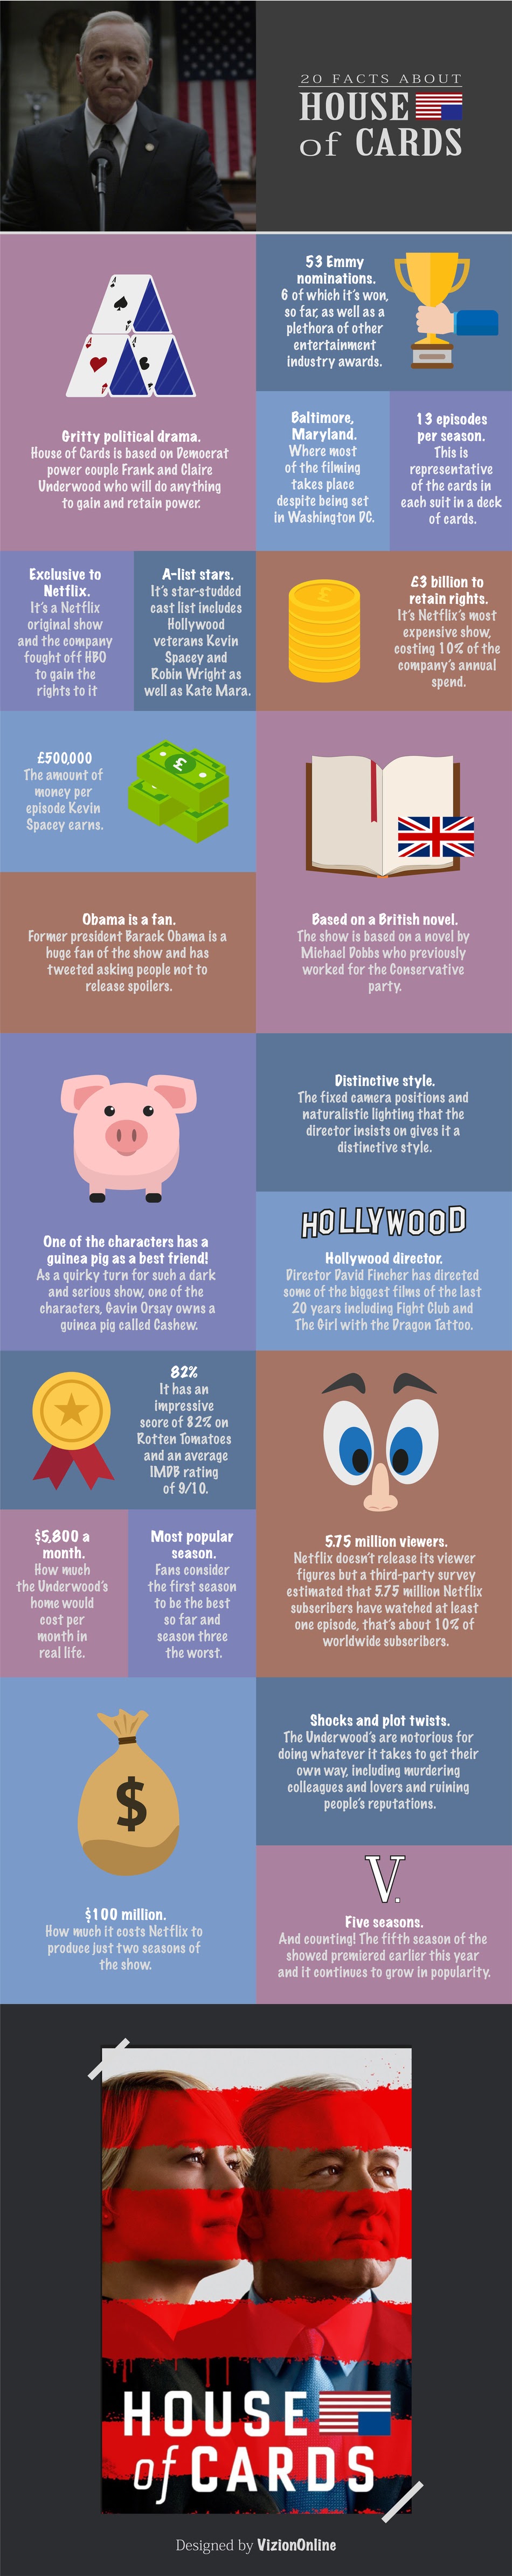 20 Facts About House of Cards #infographic